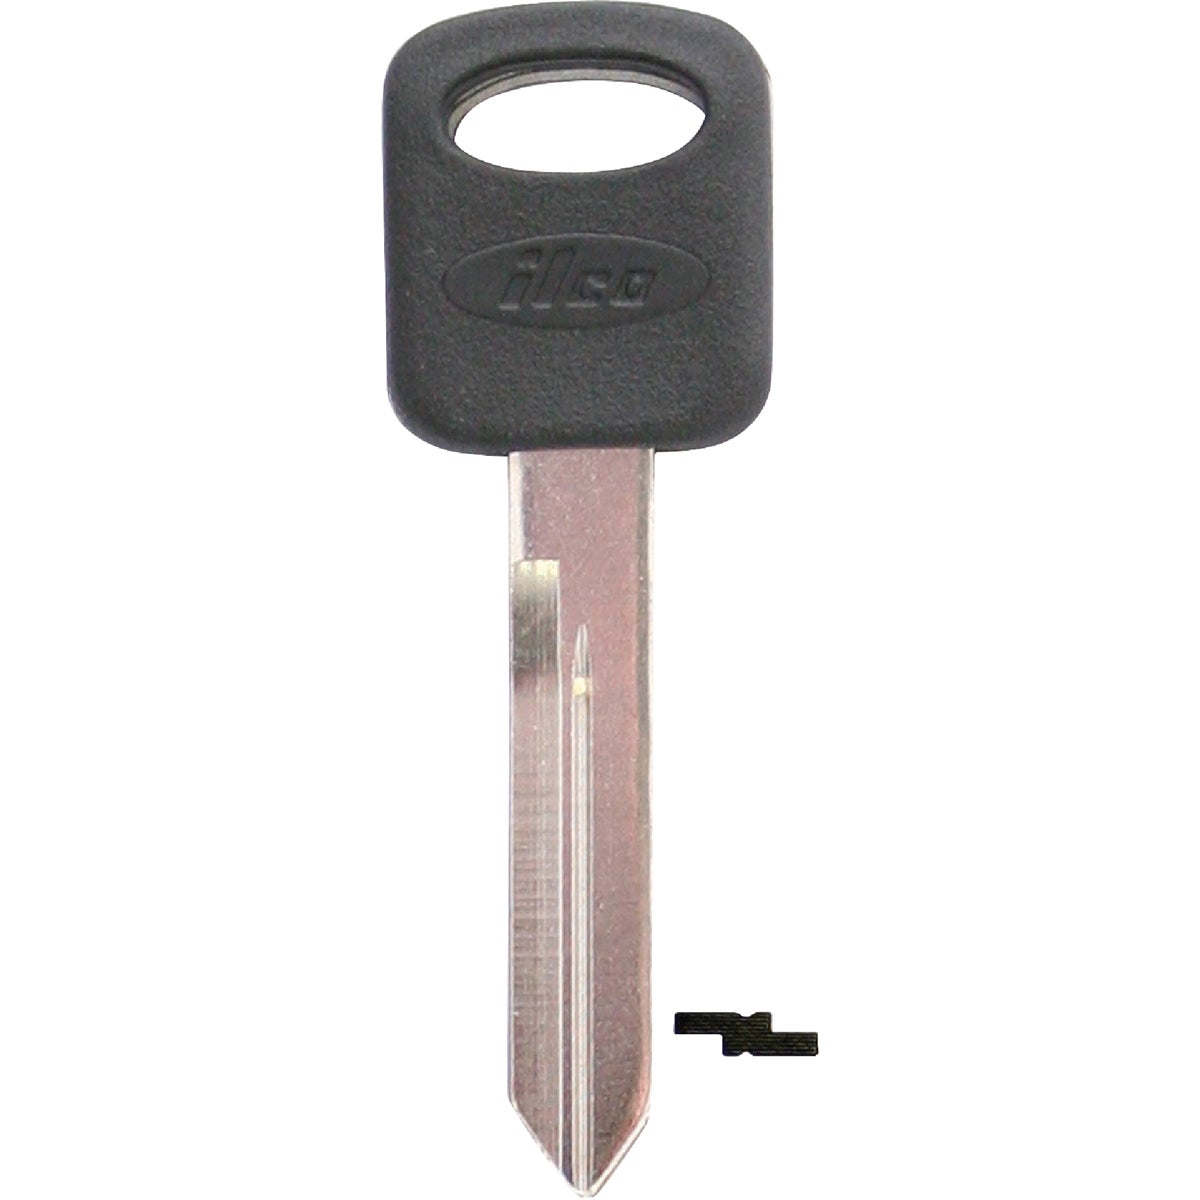 ILCO Ford Nickel Plated Automotive Key, H75-P (5-Pack)